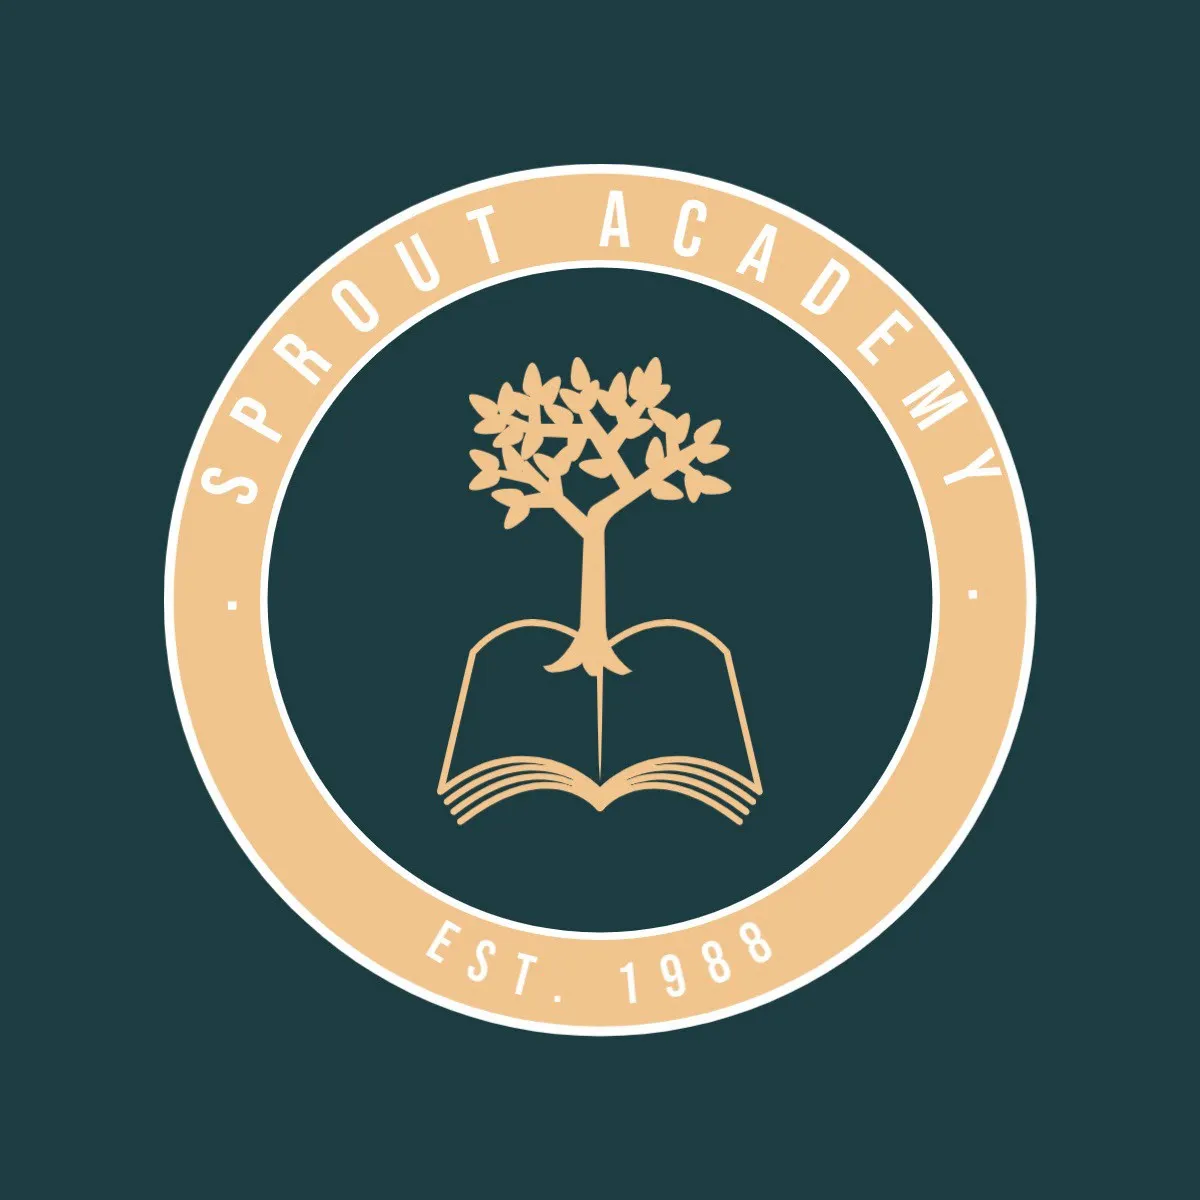 Green Cream White Sprout Academy Education Logo